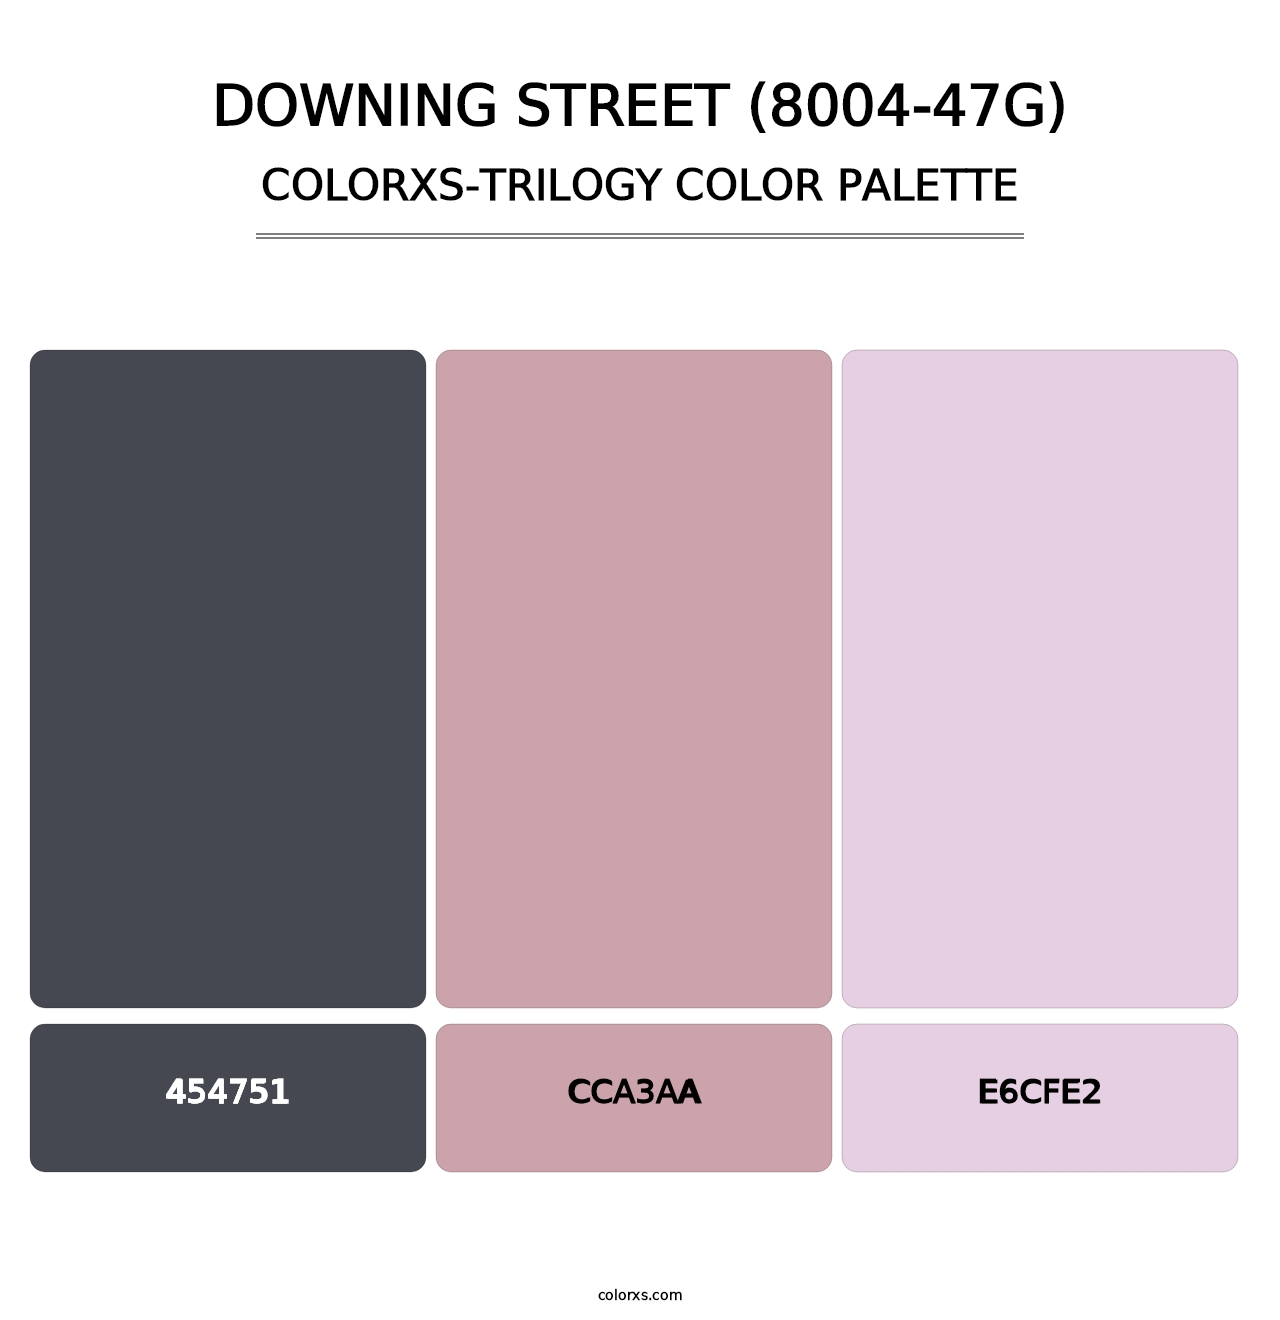 Downing Street (8004-47G) - Colorxs Trilogy Palette